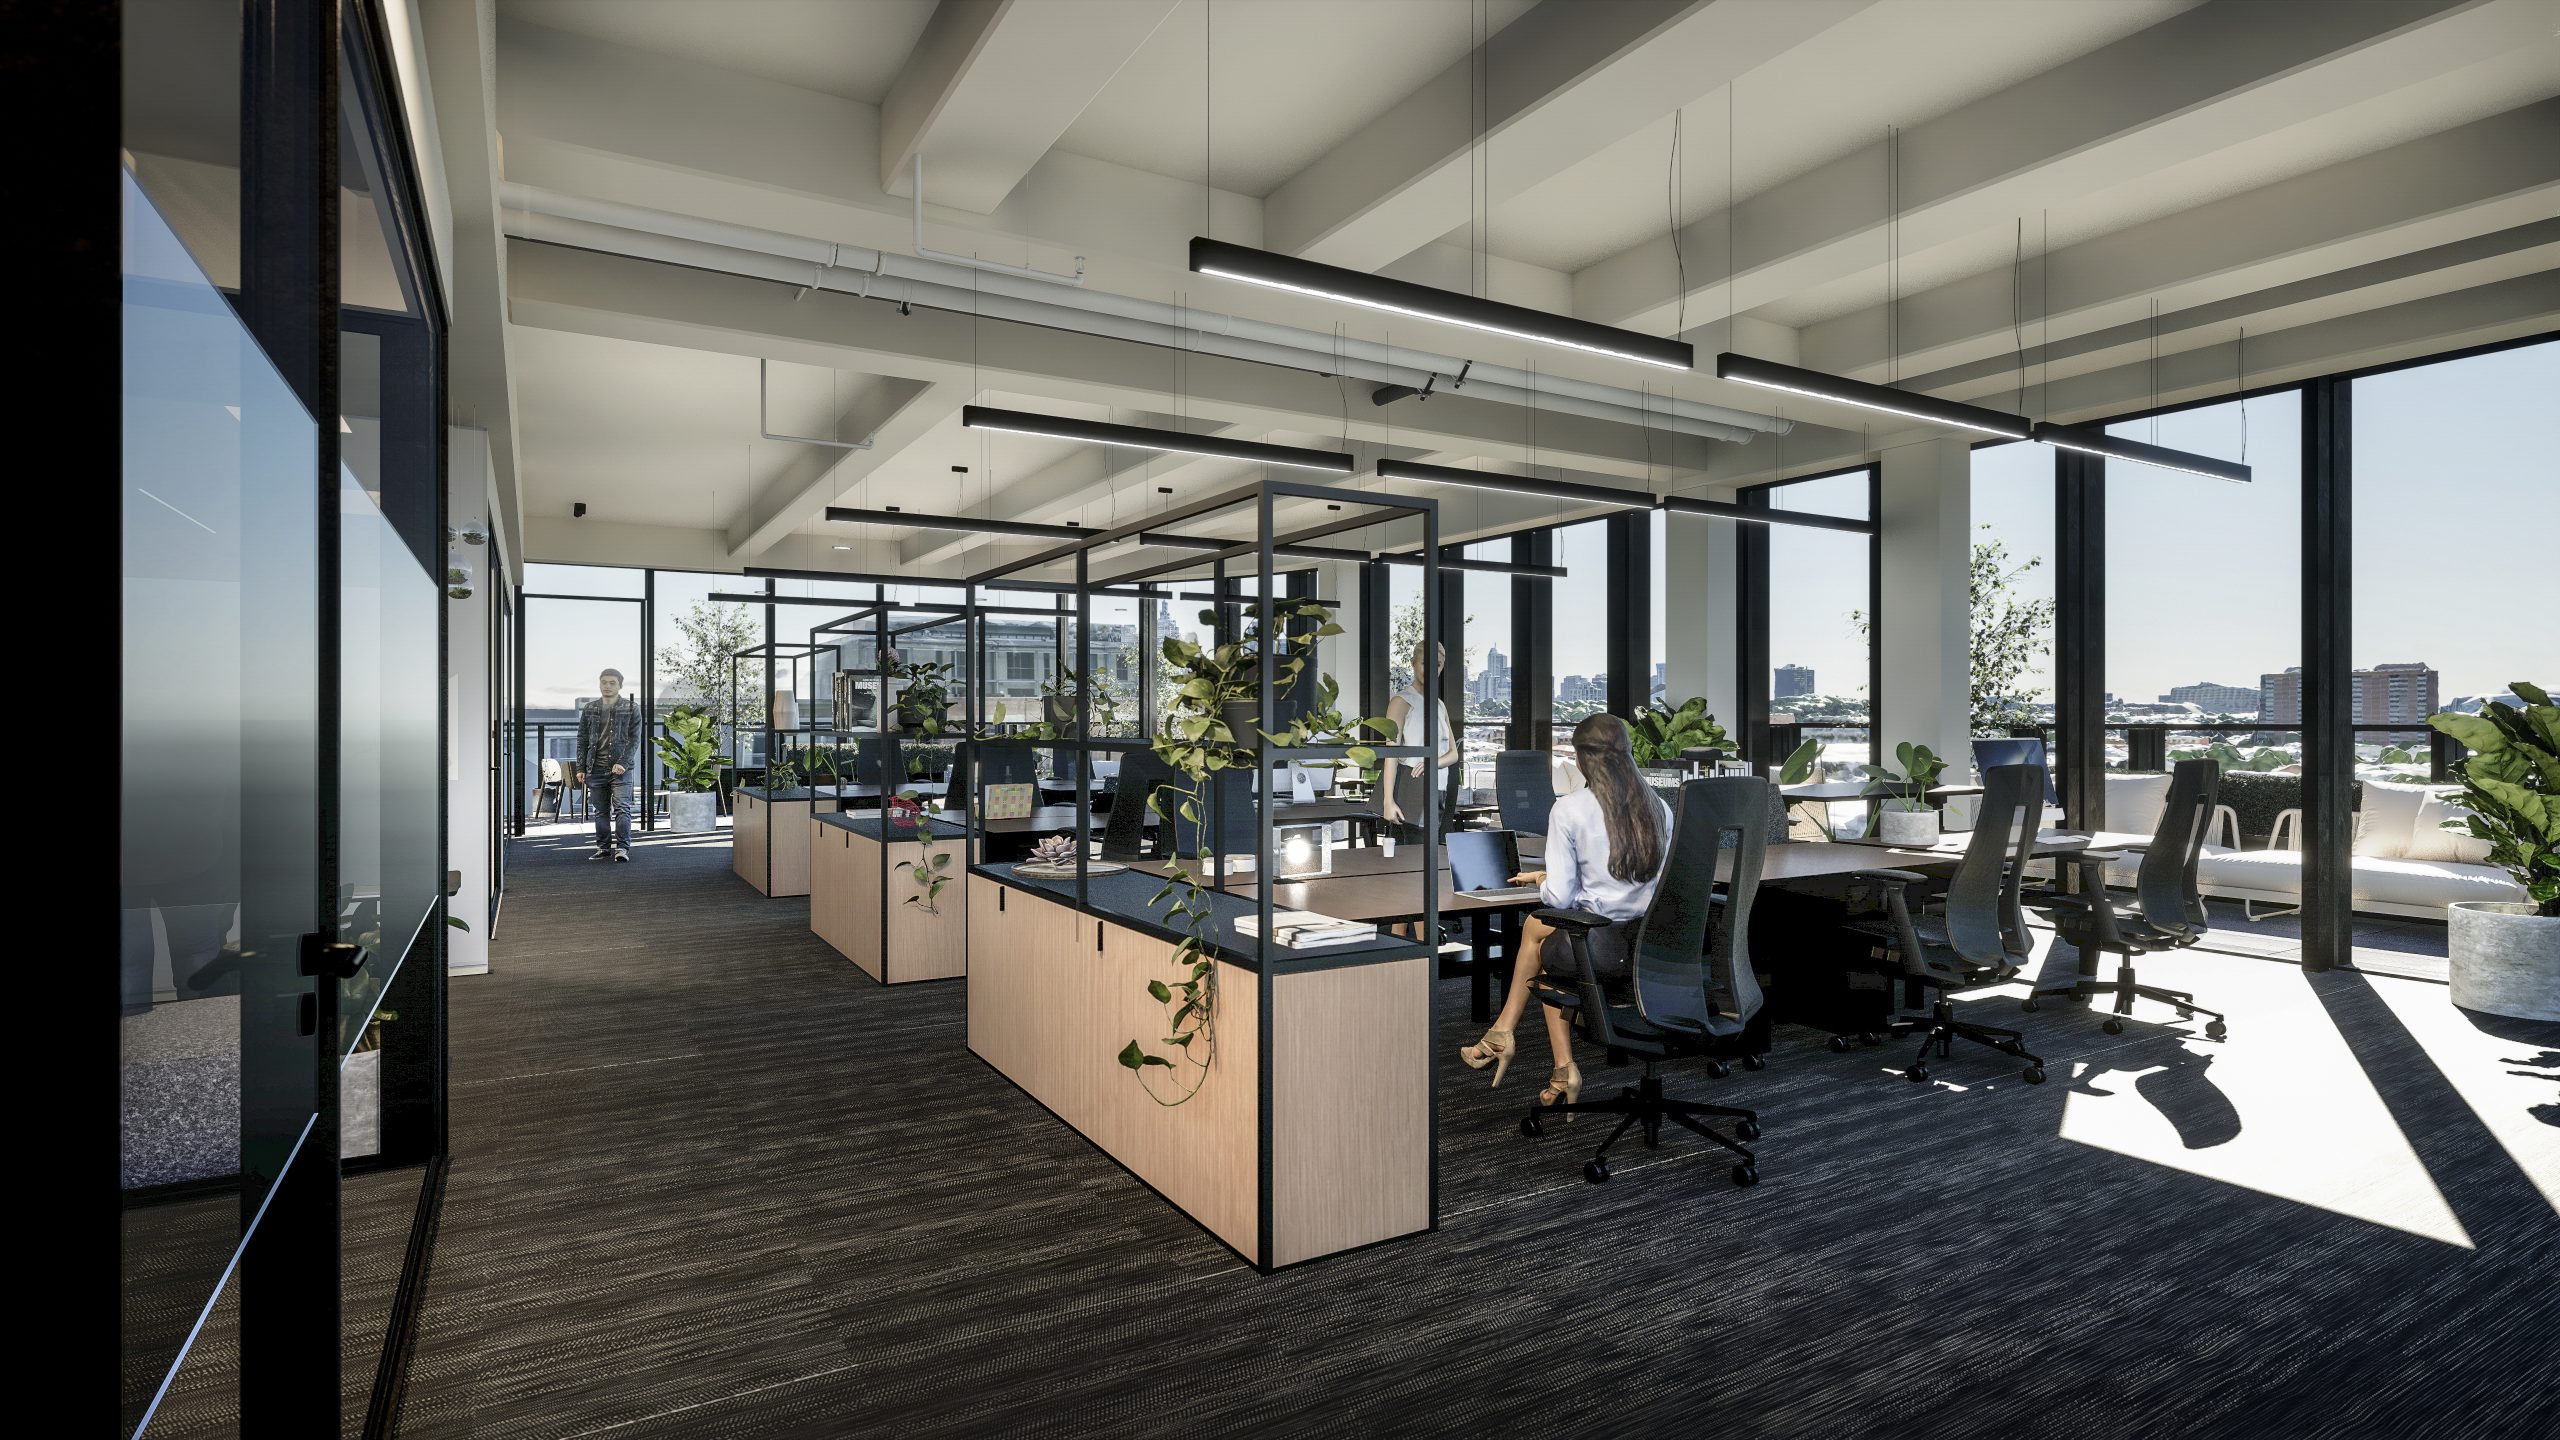 Part time office space for hybrid teams